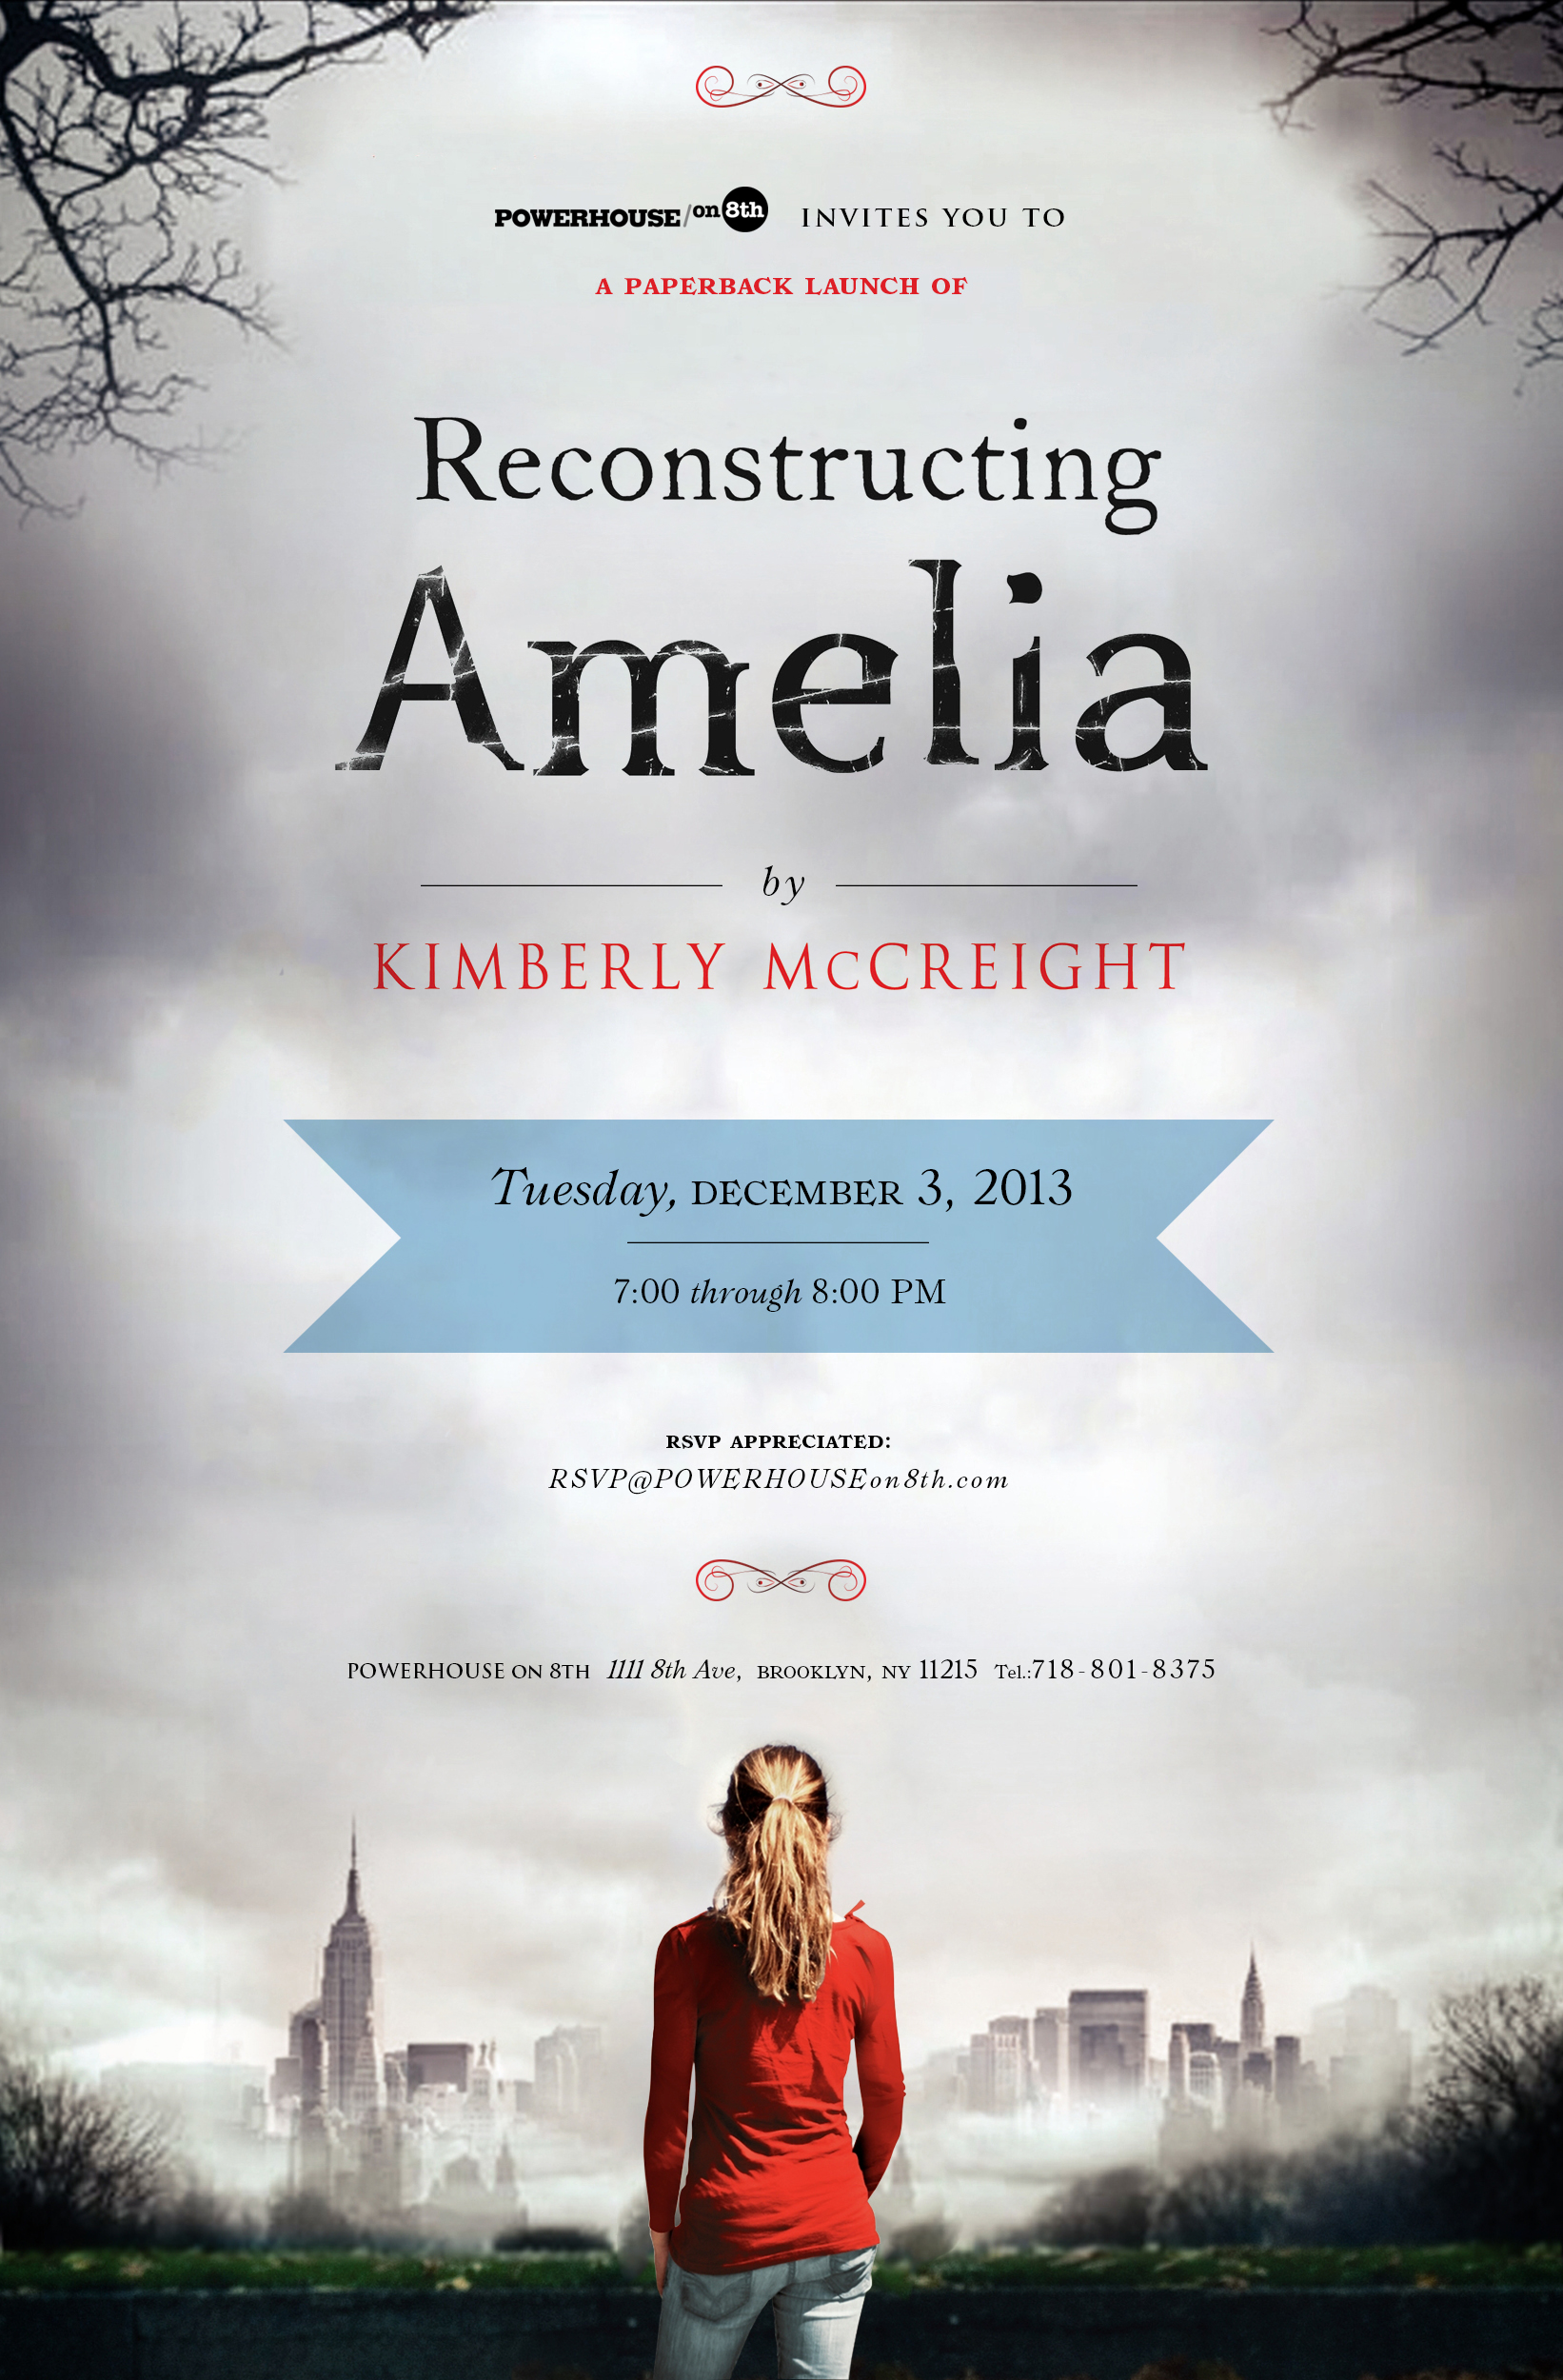 Paperback Launch: Reconstructing Amelia by Kimberly McCreight